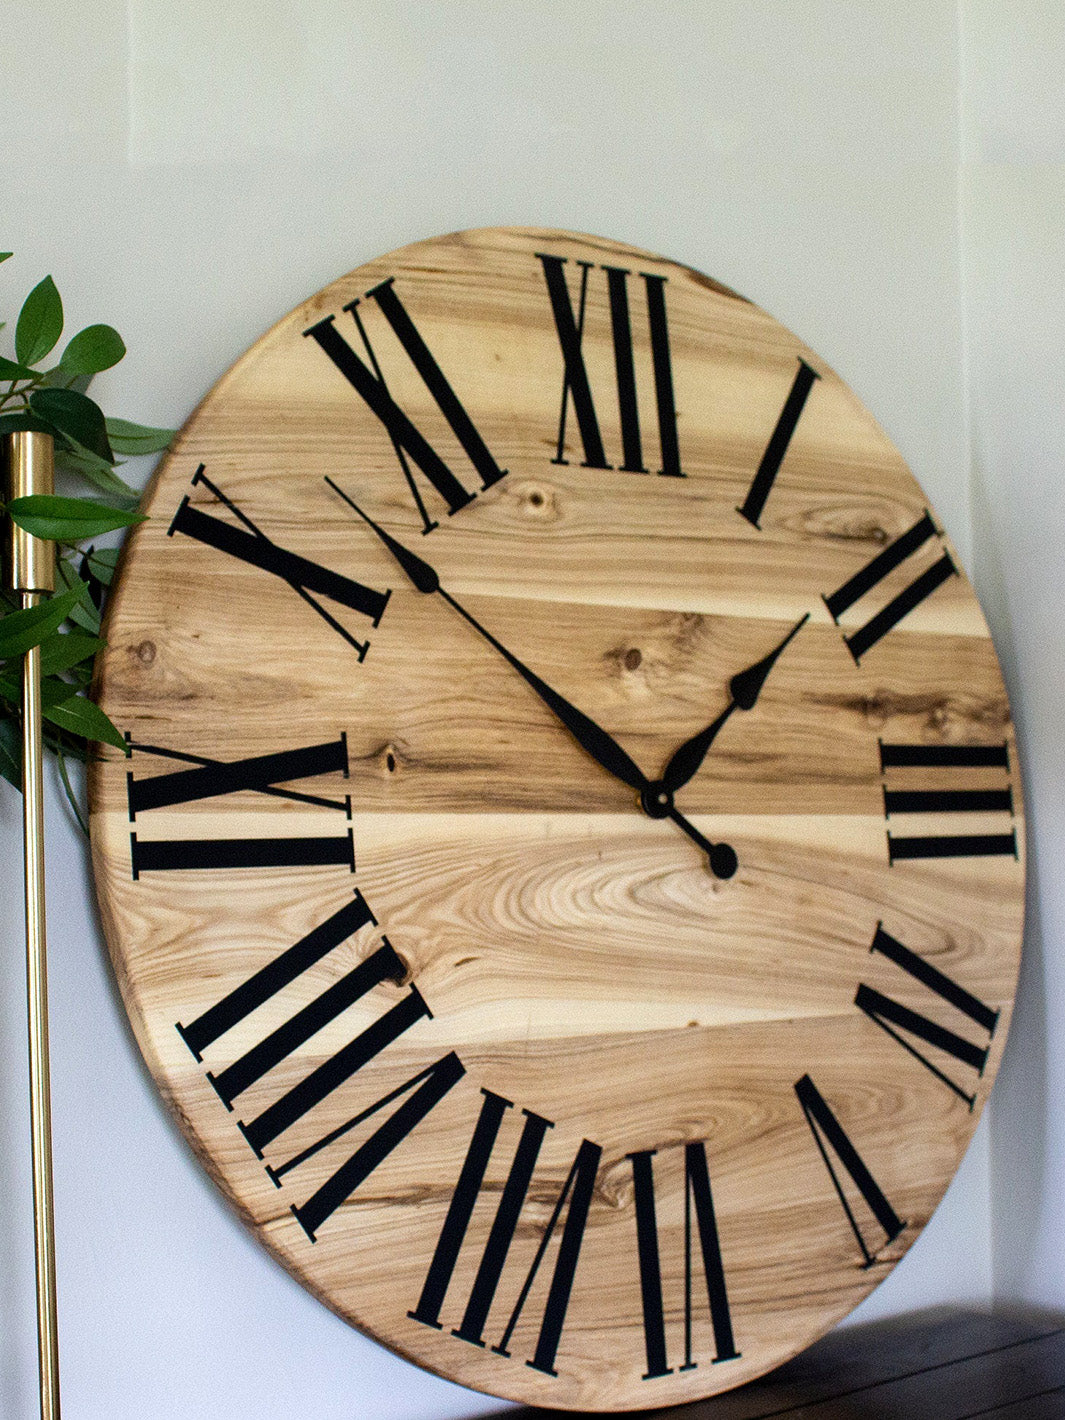 Large Solid Wood Hackberry Wall Clock with Black Roman Numerals Earthly Comfort Clocks 509-5